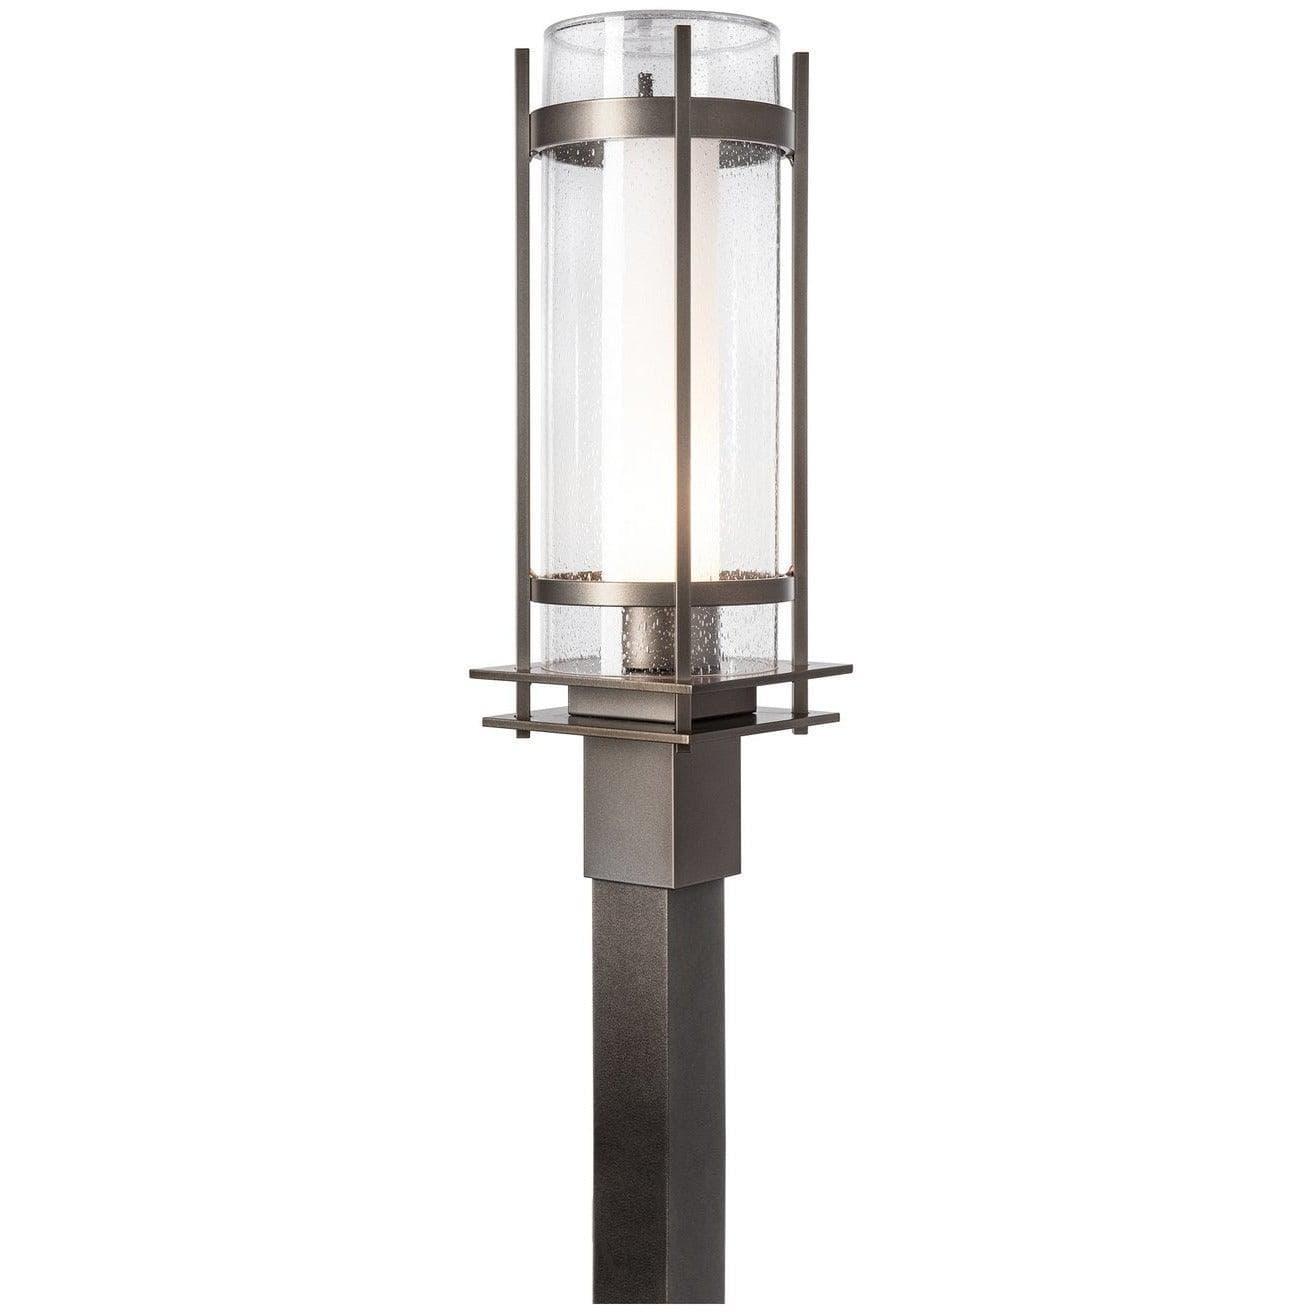 Hubbardton Forge - Banded 22-Inch One Light Outdoor Post Mount - 345897-SKT-77-ZS0684 | Montreal Lighting & Hardware